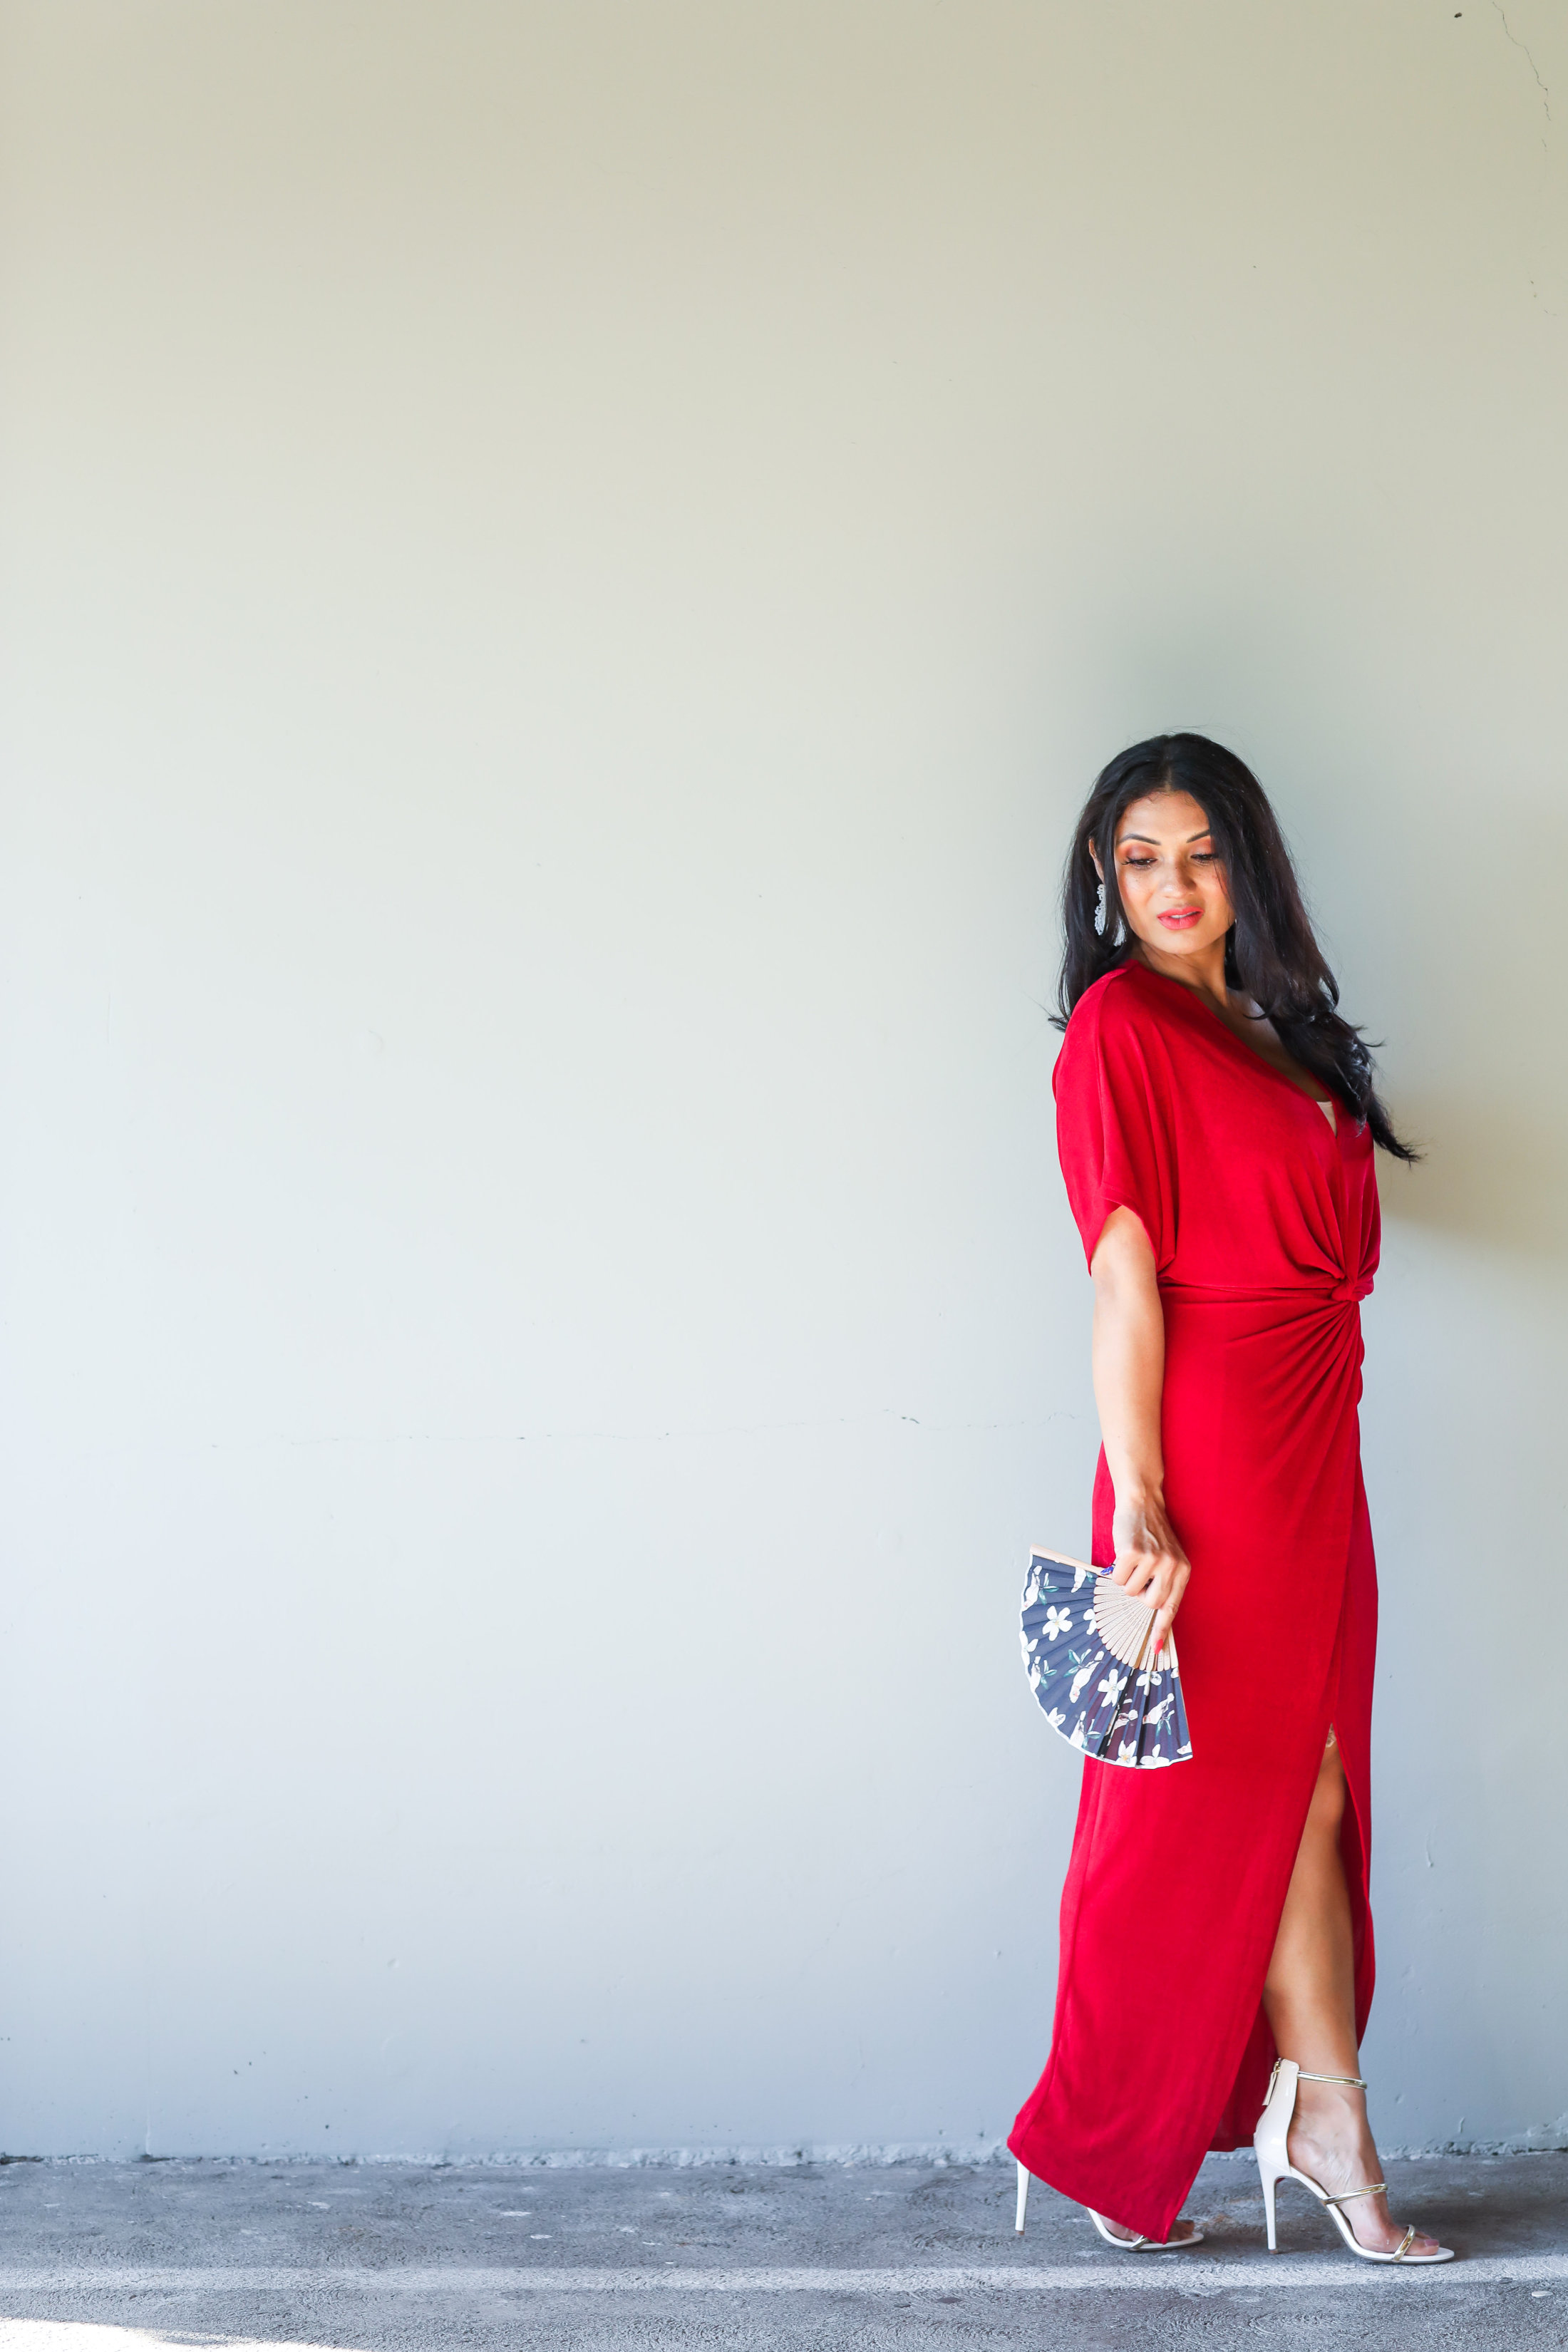 The Only Dress You Need on Amazon [Fashion] - Red Maxi Dress - Found It On Amazon